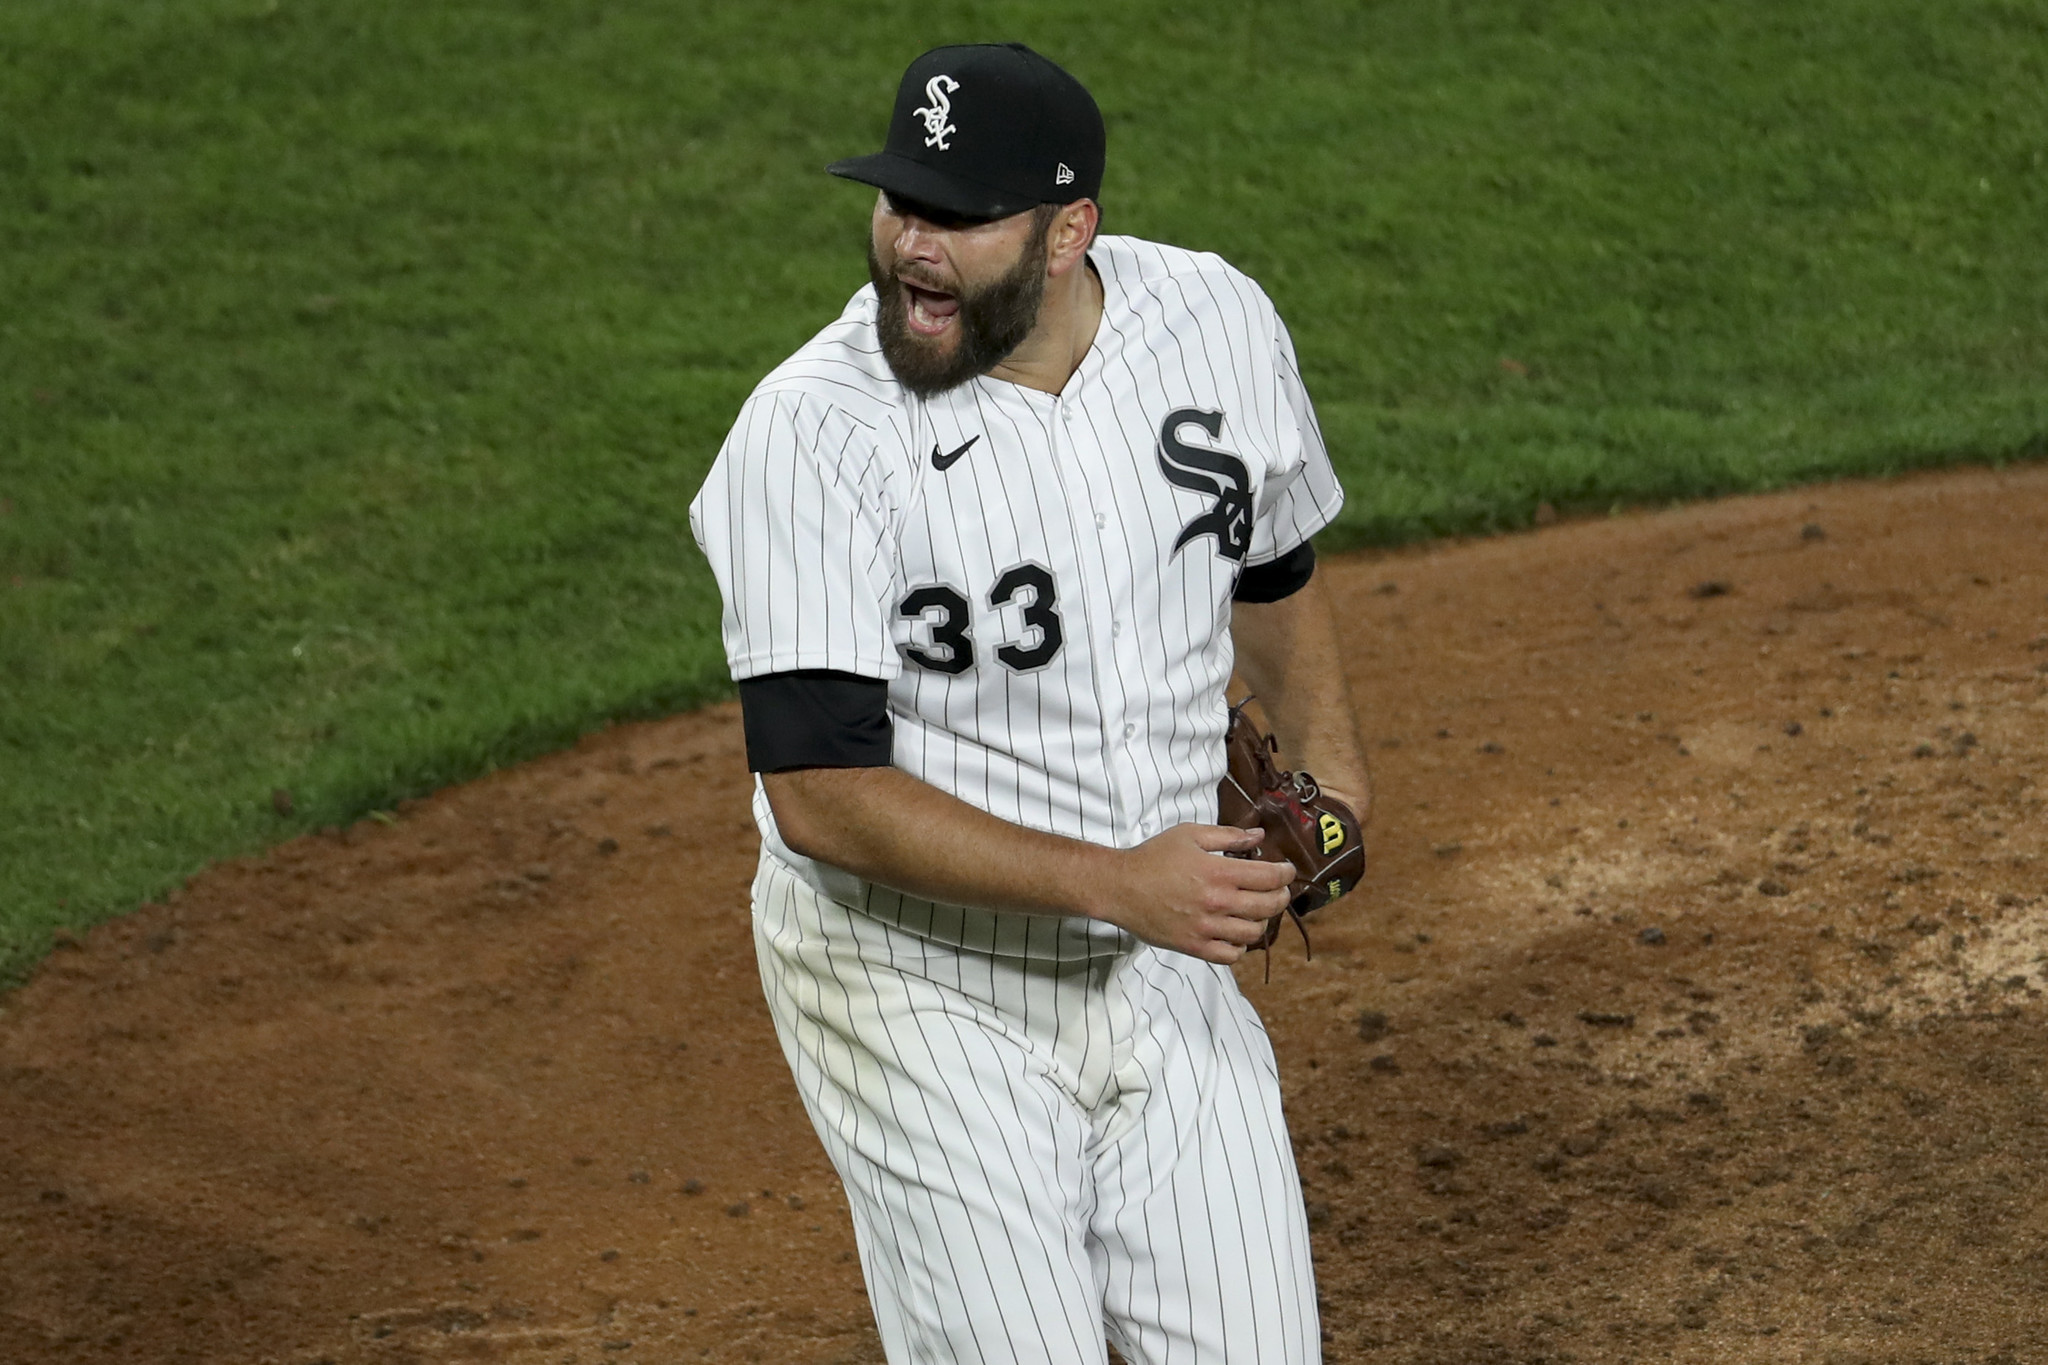 Column: Weather doesn't dampen mood of Chicago White Sox fans